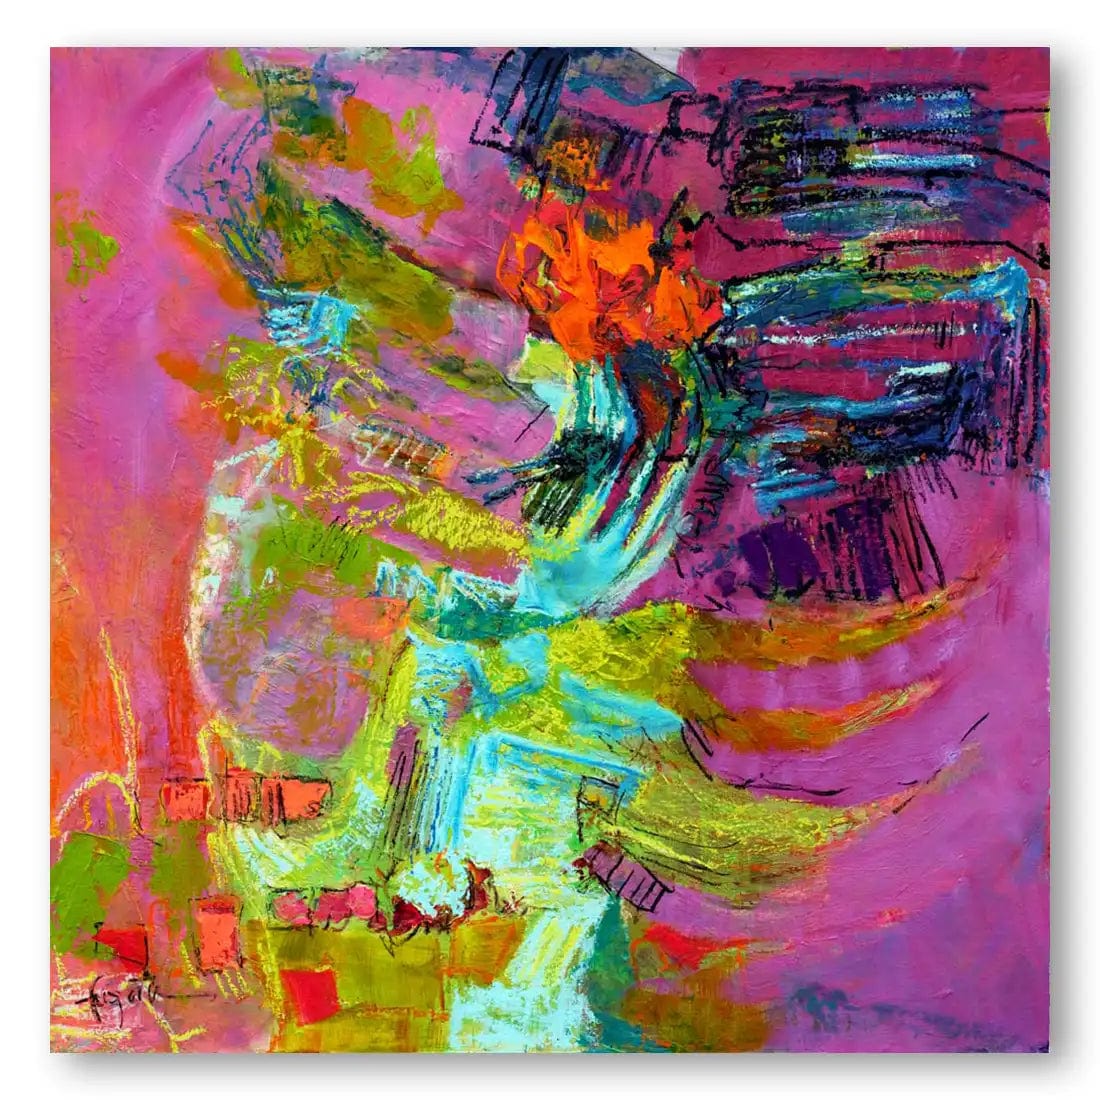 A large colorful abstract art print